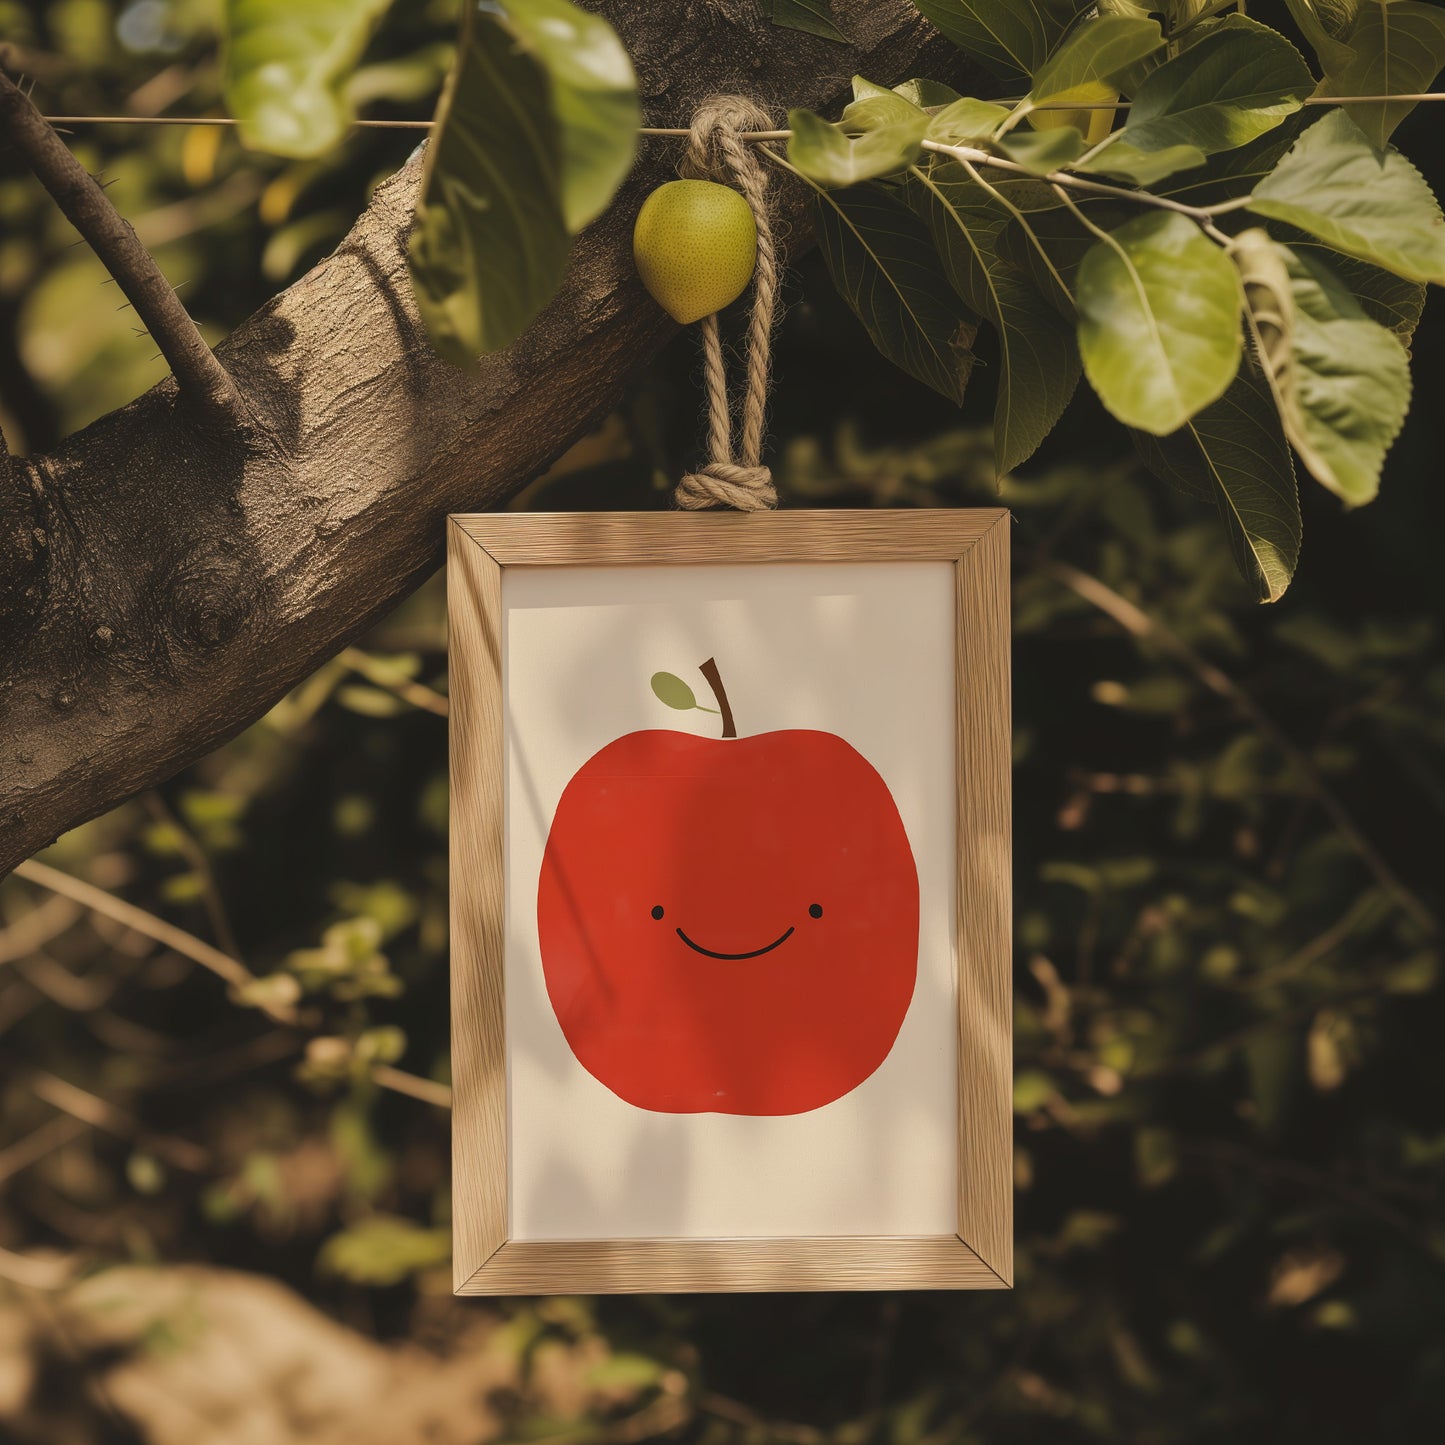 A framed illustration of a smiling red apple hanging from a tree branch.